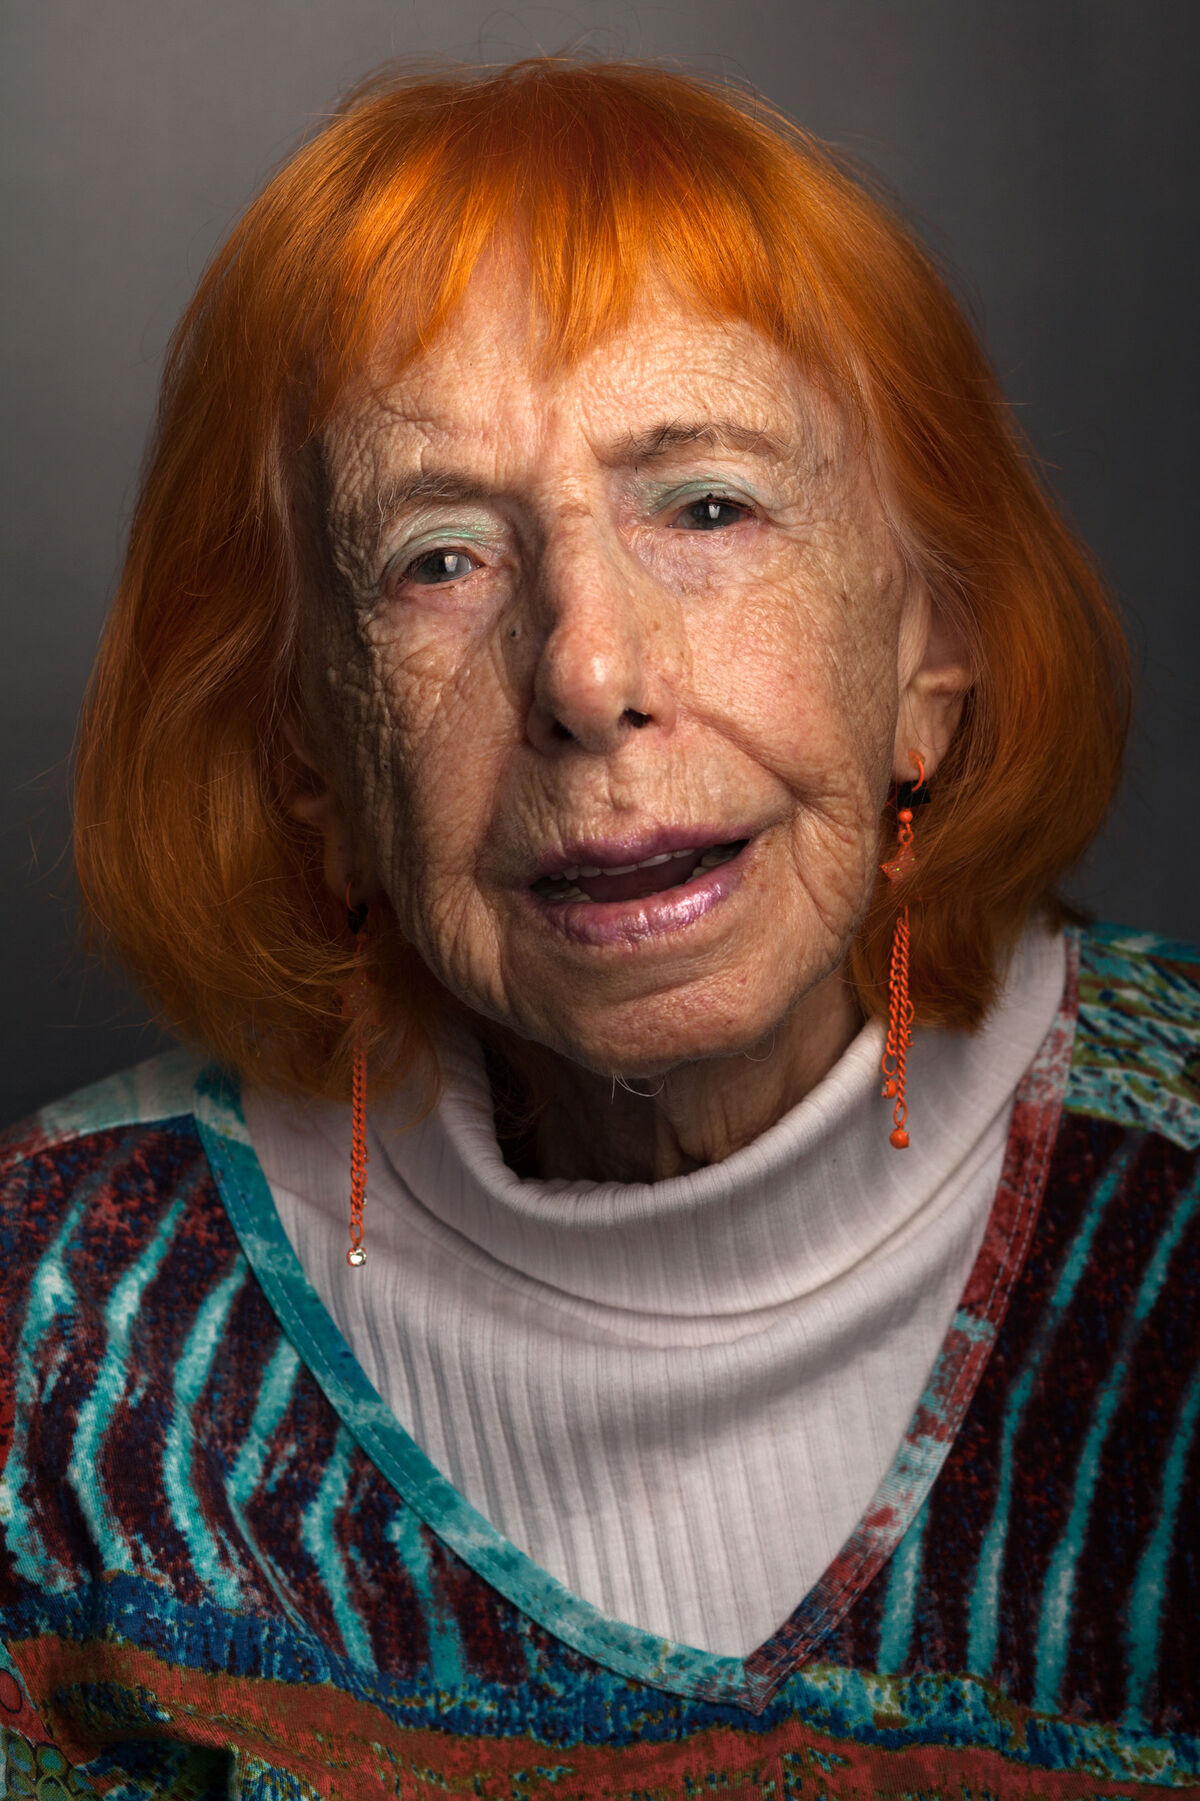 Edith Stephen’s first Westbeth application was rejected; as a university dance teacher, she made too much money to qualify. She was later admitted while unemployed. Photo by Frankie Alduino.